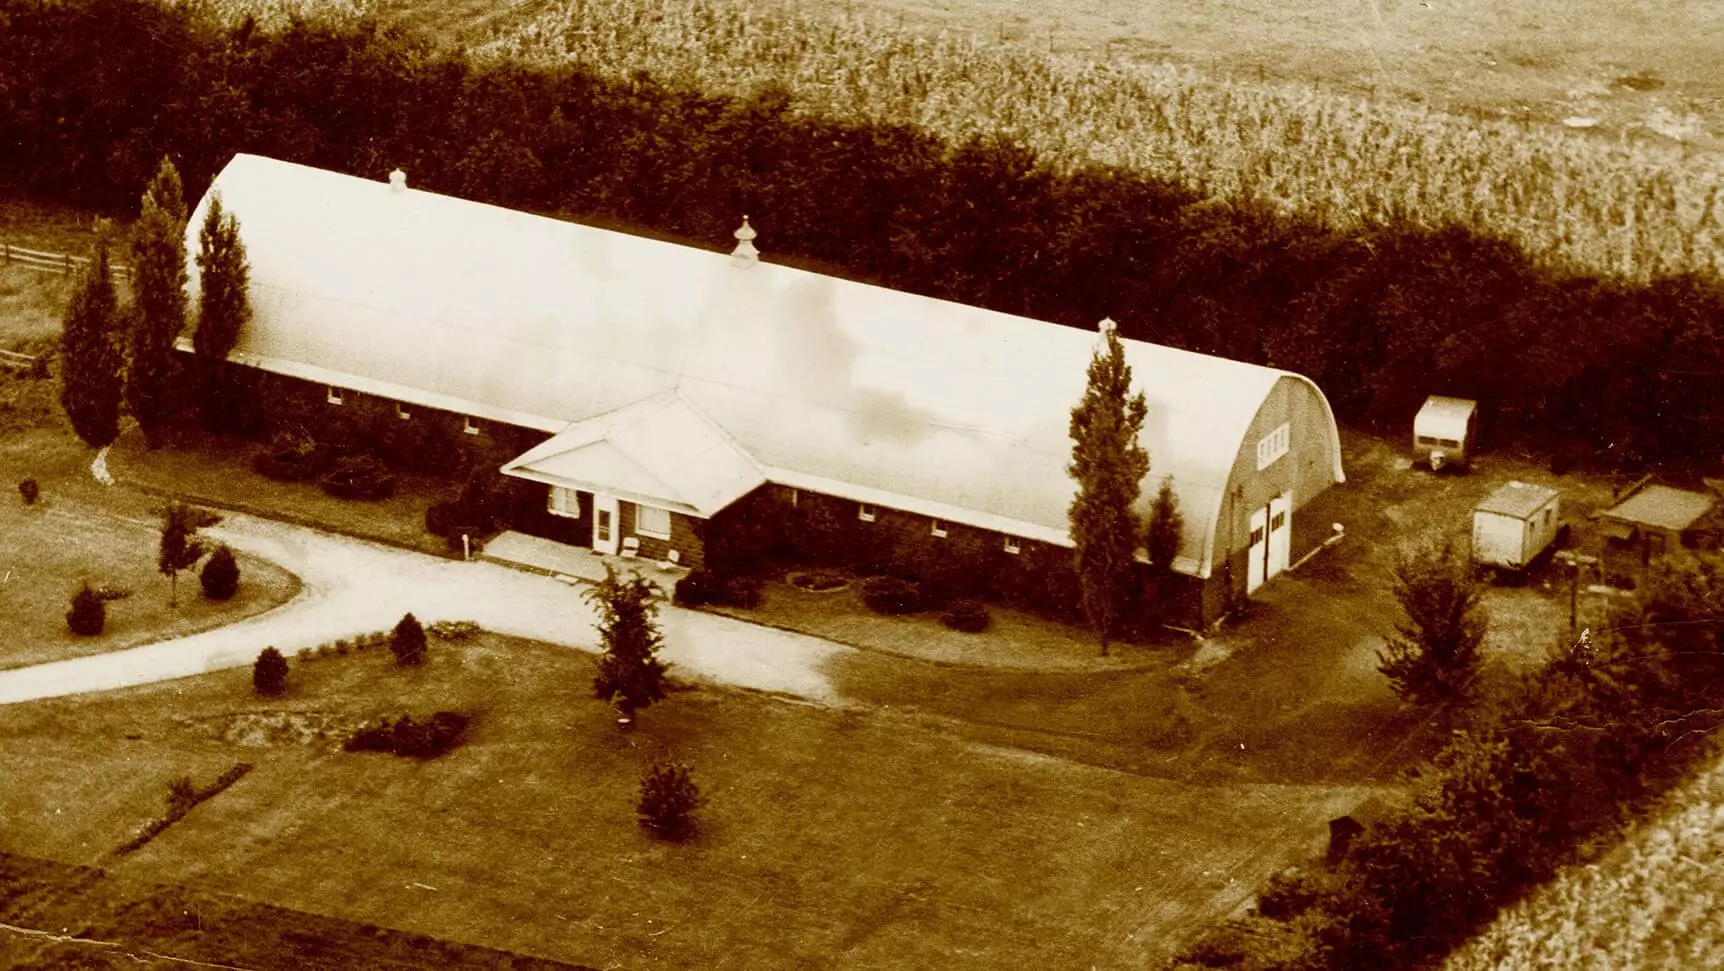 A very long building with a curved roof. Entrance is right int he middle of the long side of the building, a sidewalk leads up to the door. Around the building are trees, bushes, and corn fields.